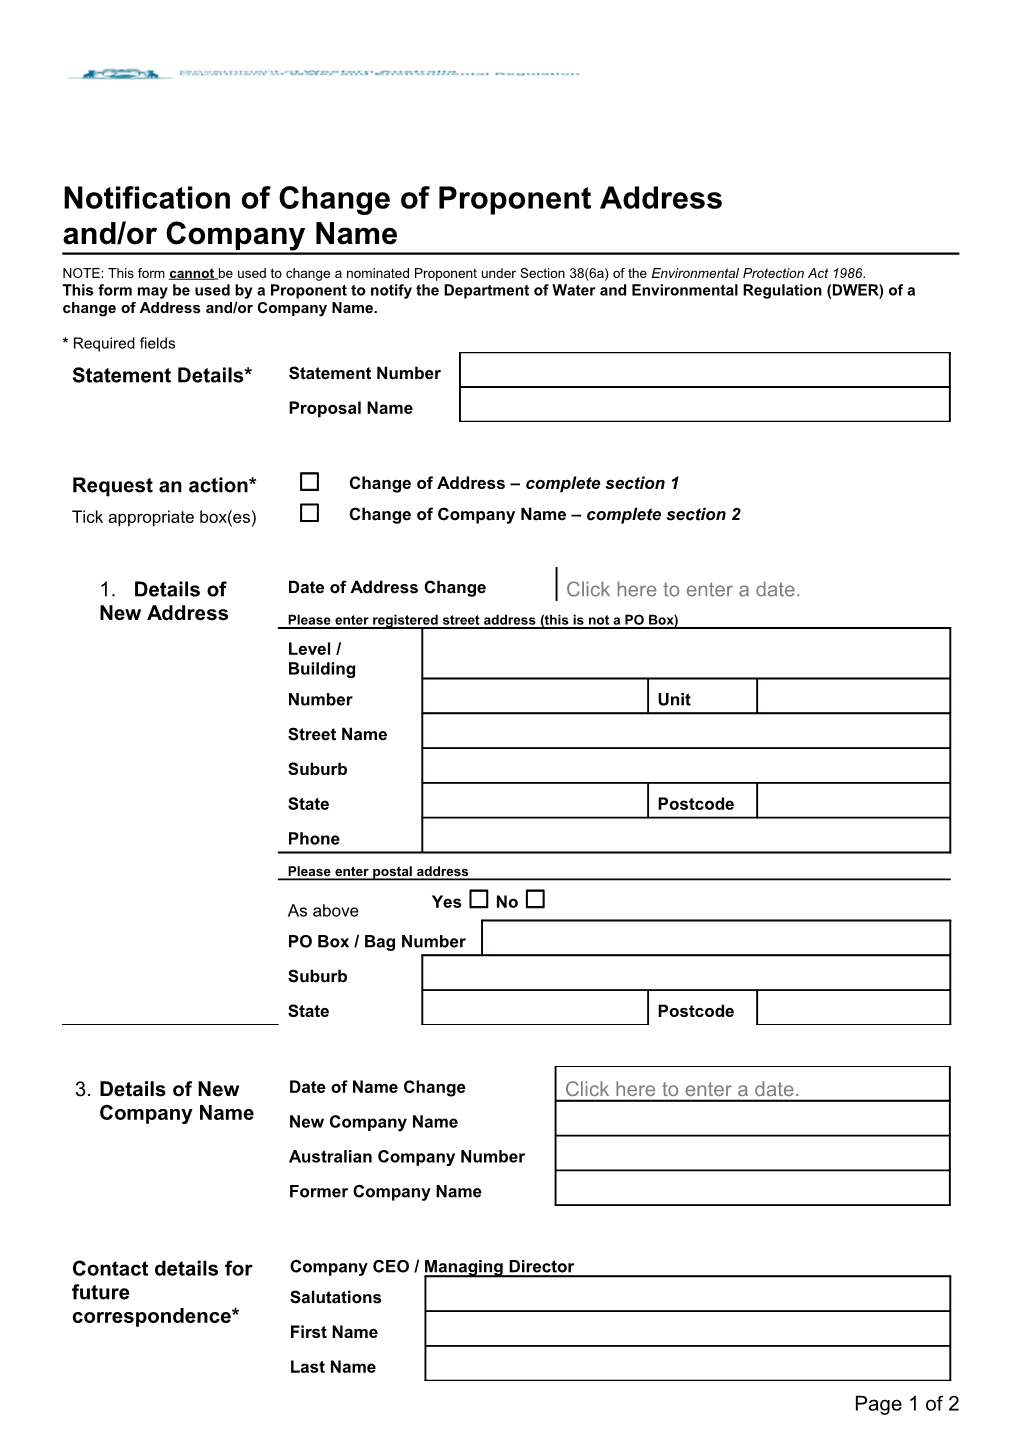 Form Post Assessment Form 3 - Notification of Change of Proponent Address and Or Name